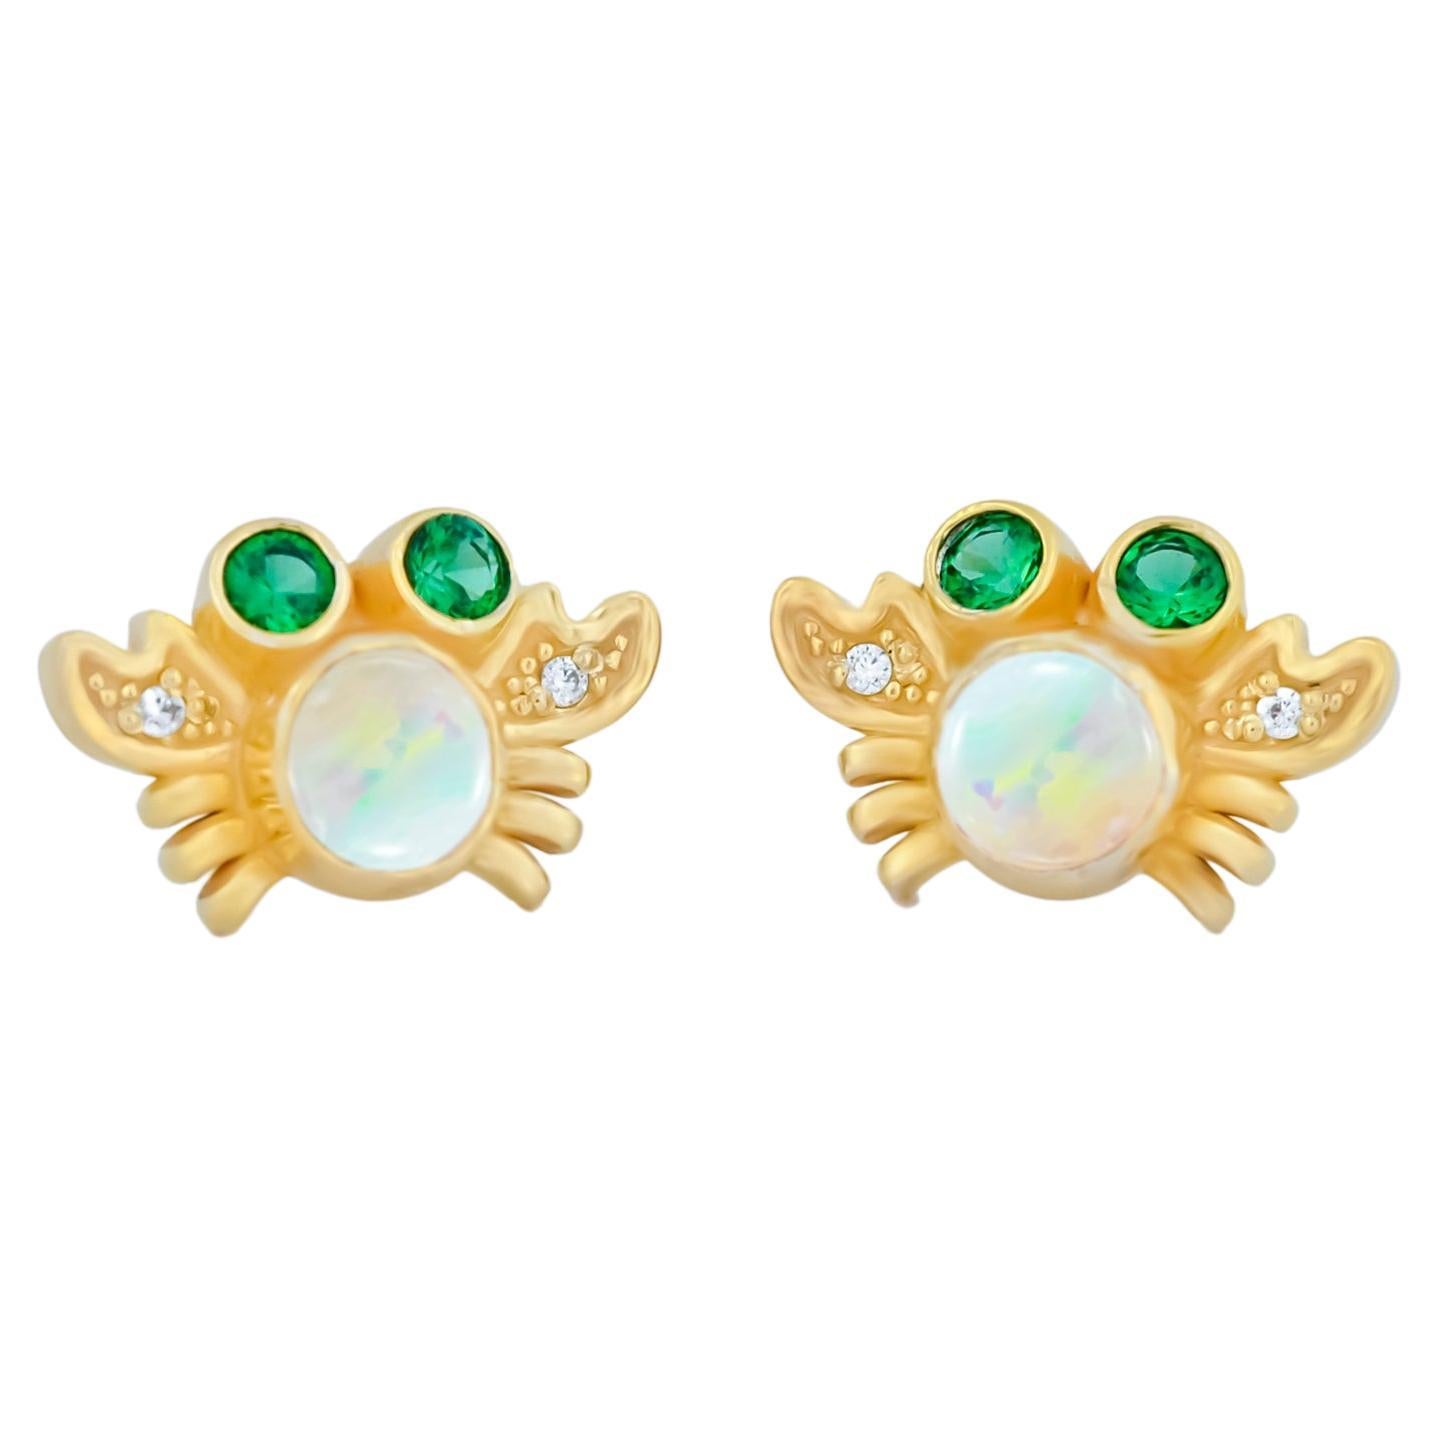 Sea Crab earrings studs with opals in 14k gold.  For Sale